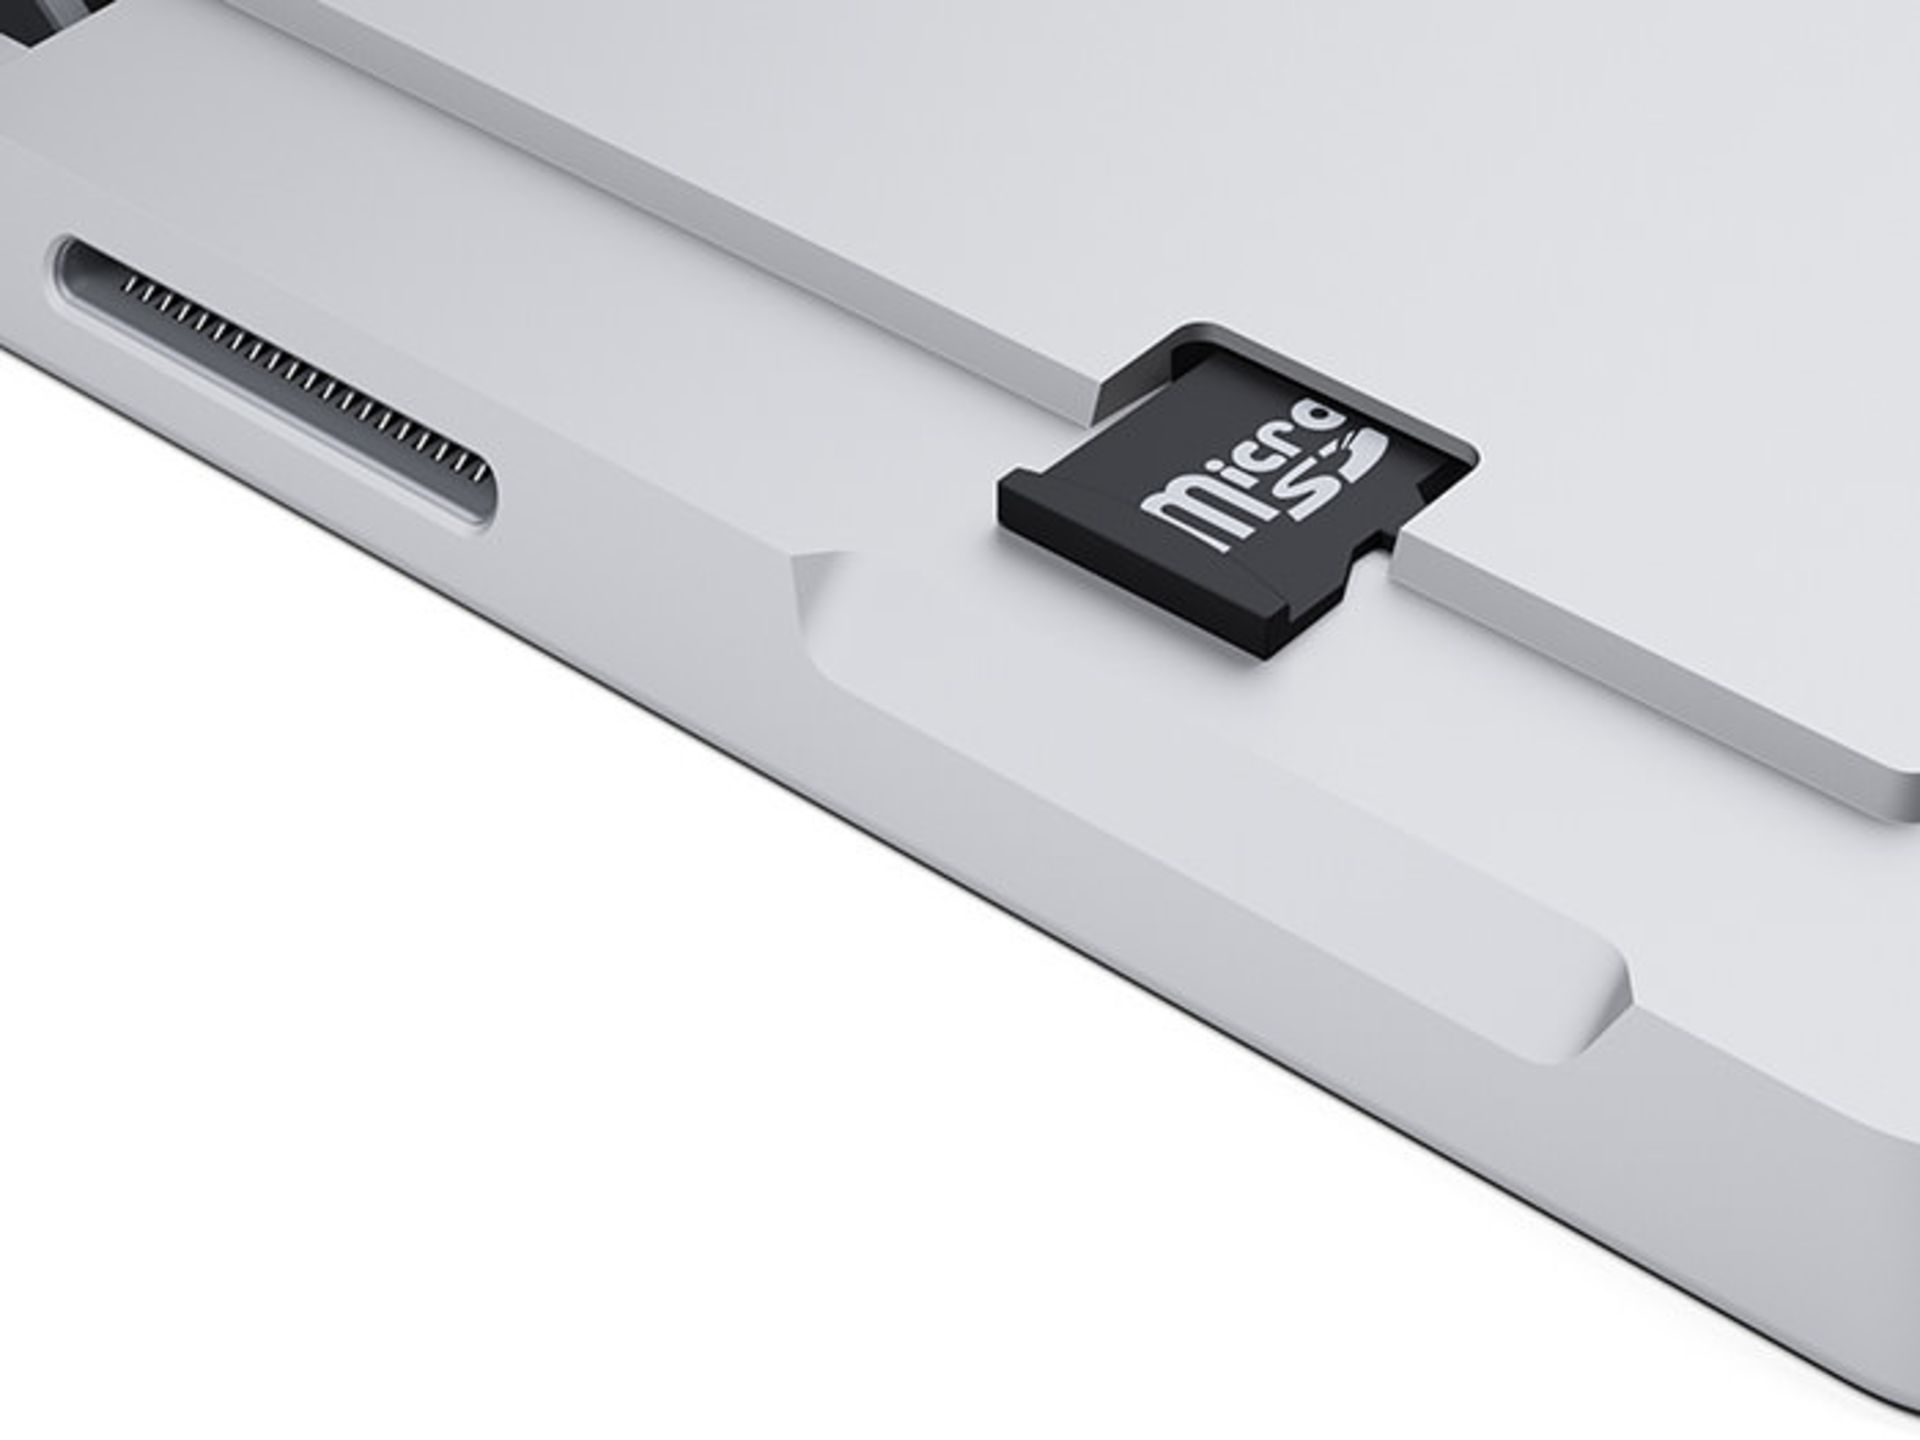 Mini-DisplayPort-allows-you-to-quickly-plug-in-an-external-monitor